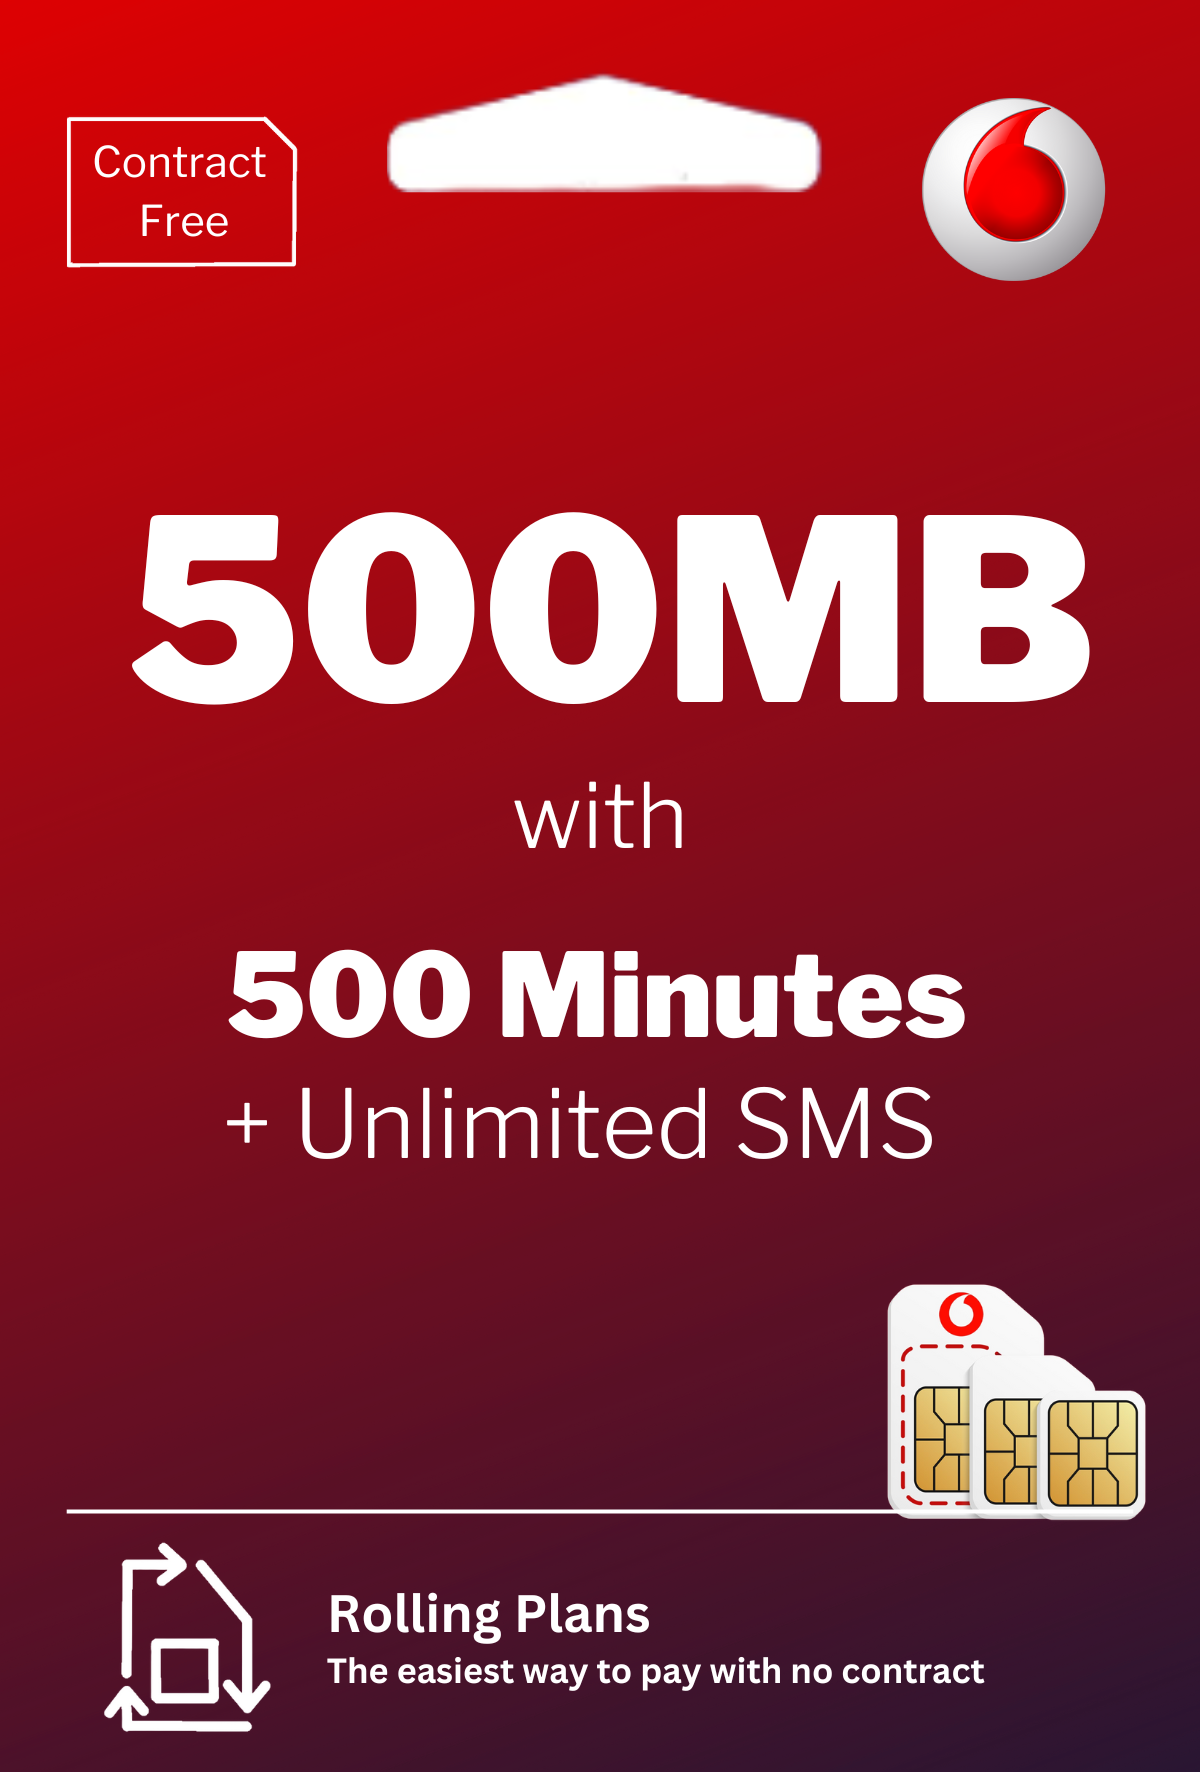 500MB DATA + 500 minutes of calls + Unlimited SMS.